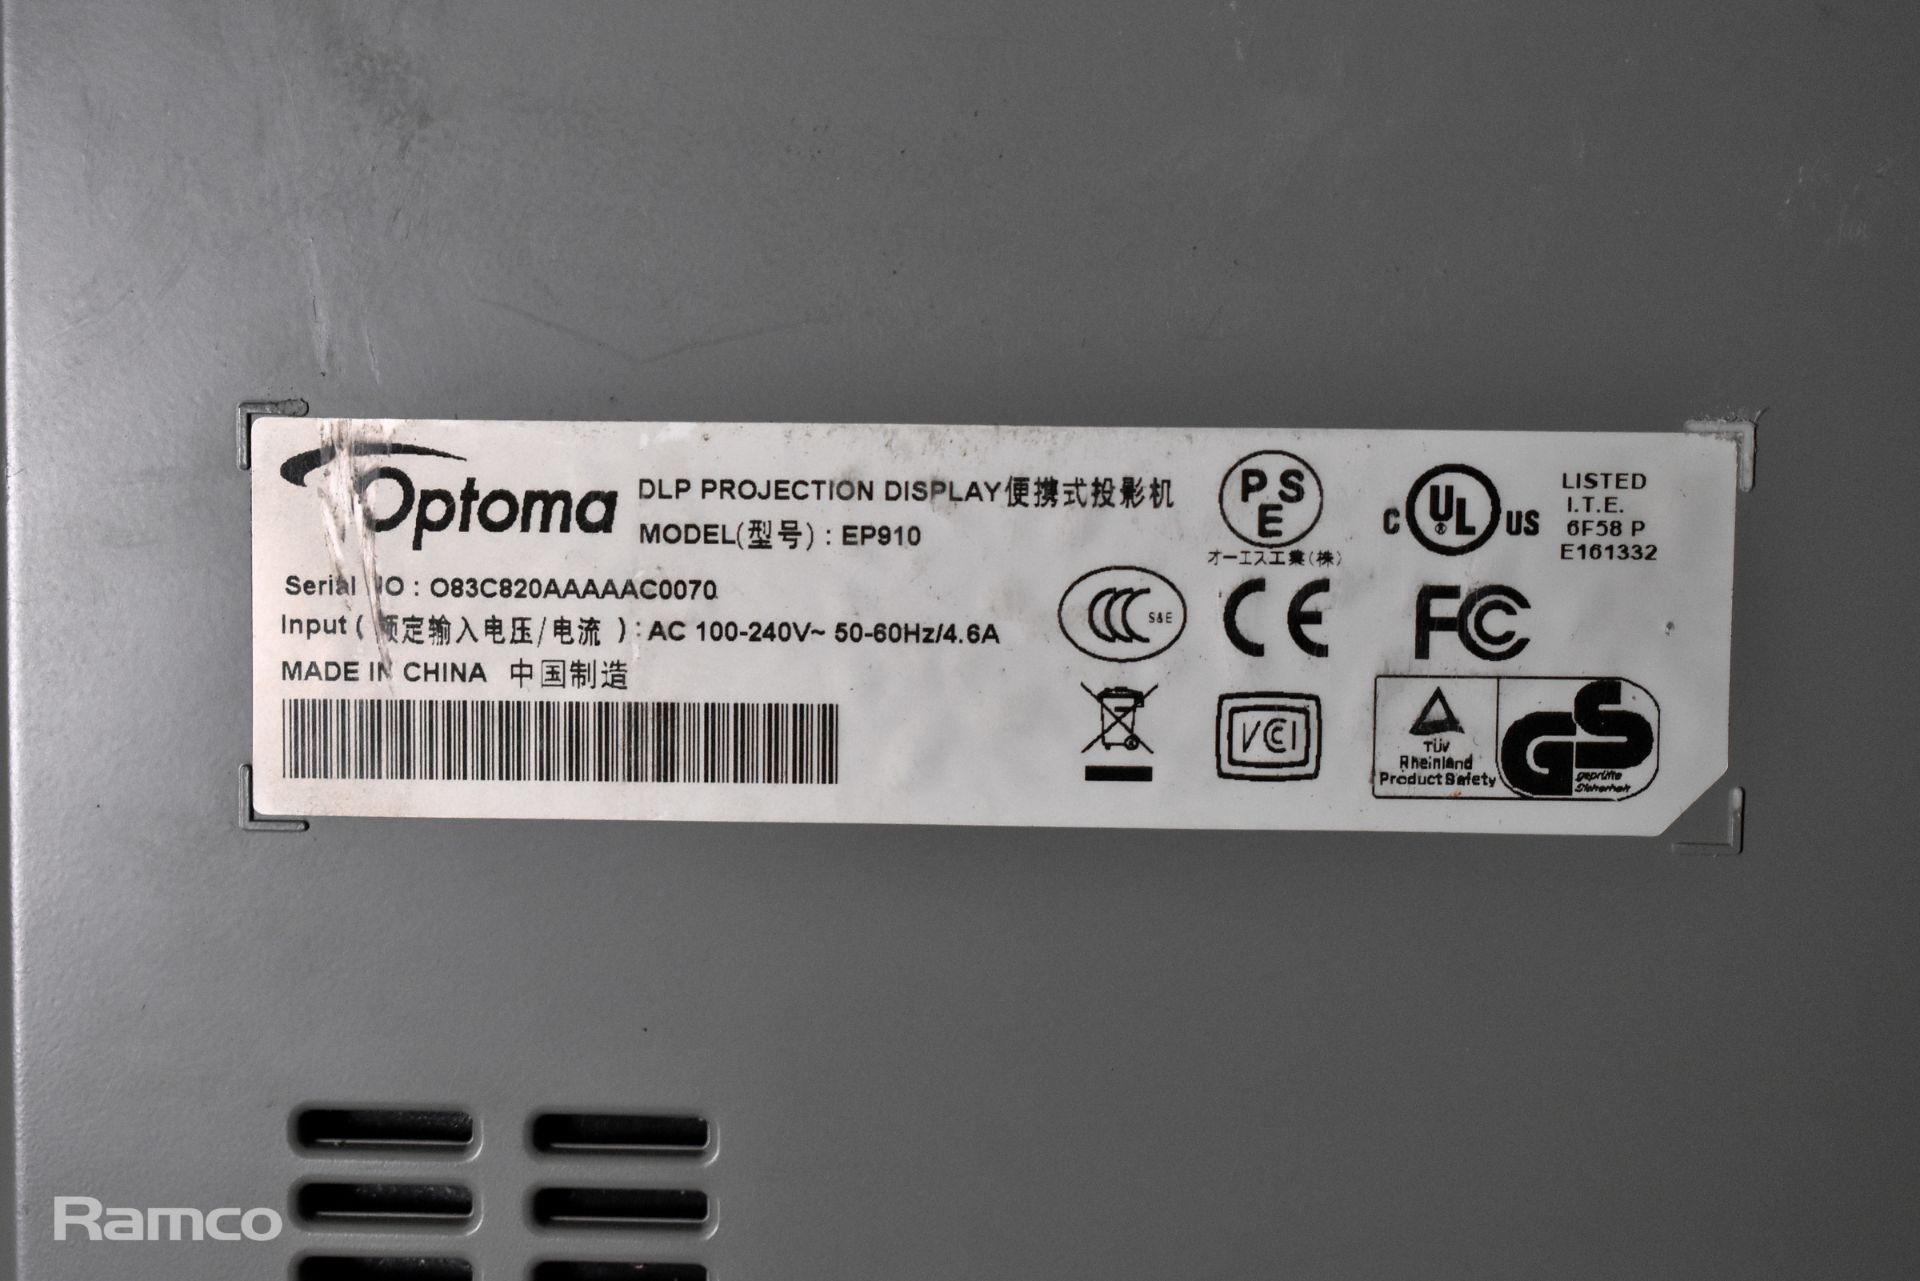 Optoma EP910 DLP projector display unit - Image 5 of 5